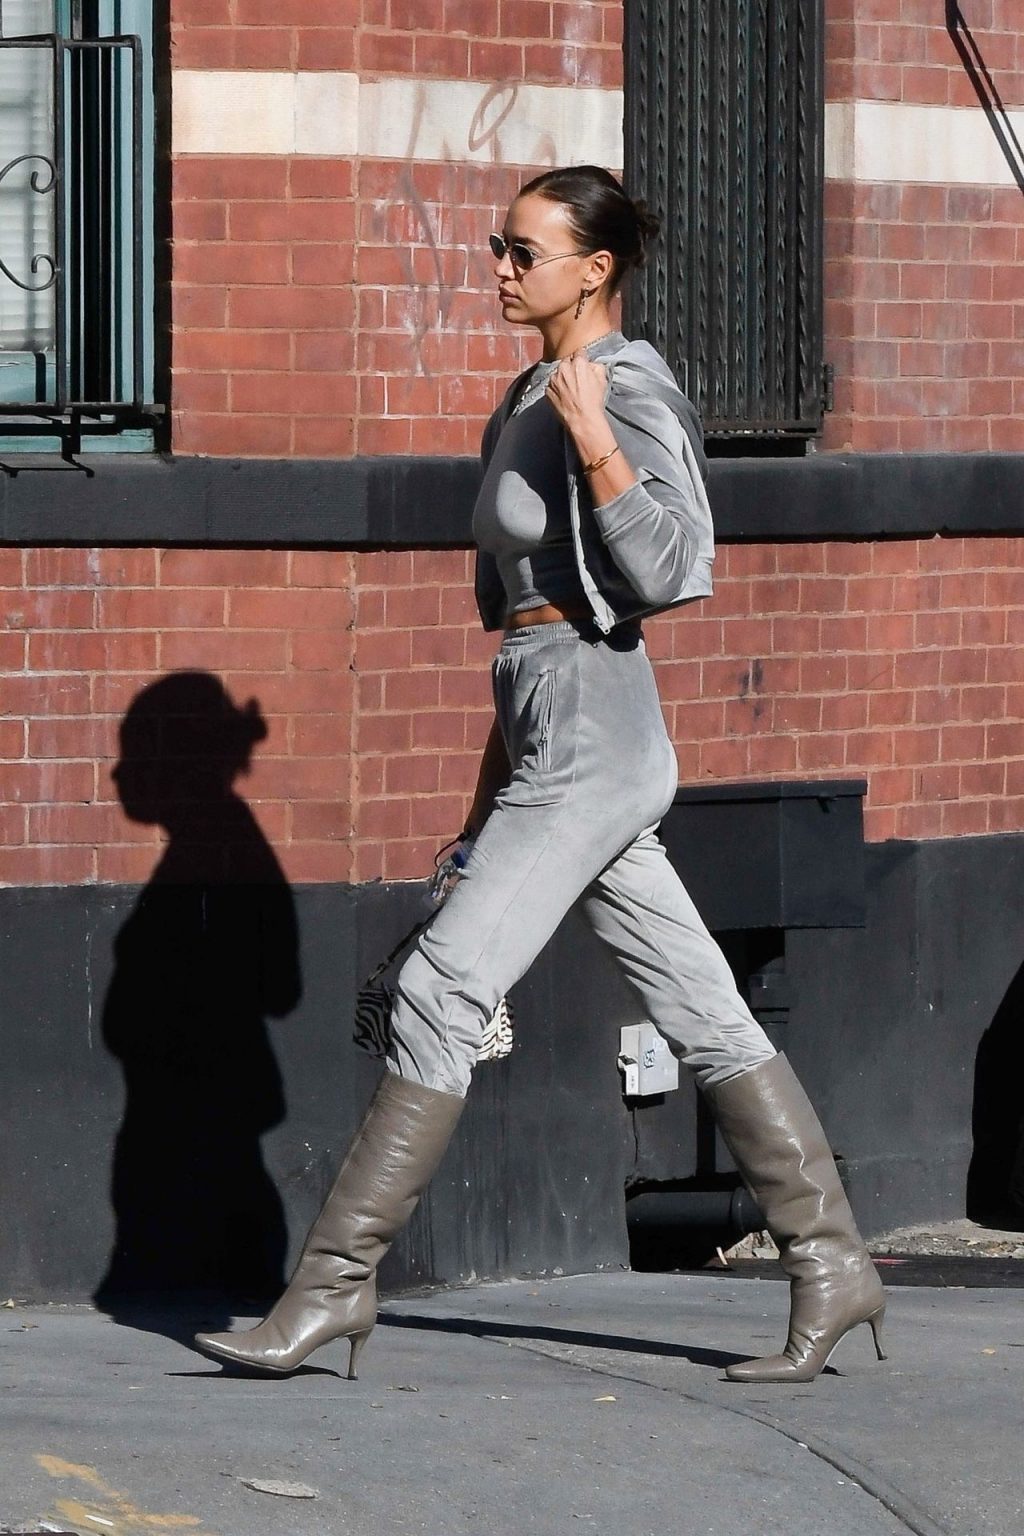 Irina Shayk Catches the Eye of a Construction Worker in New York City (80 Photos)